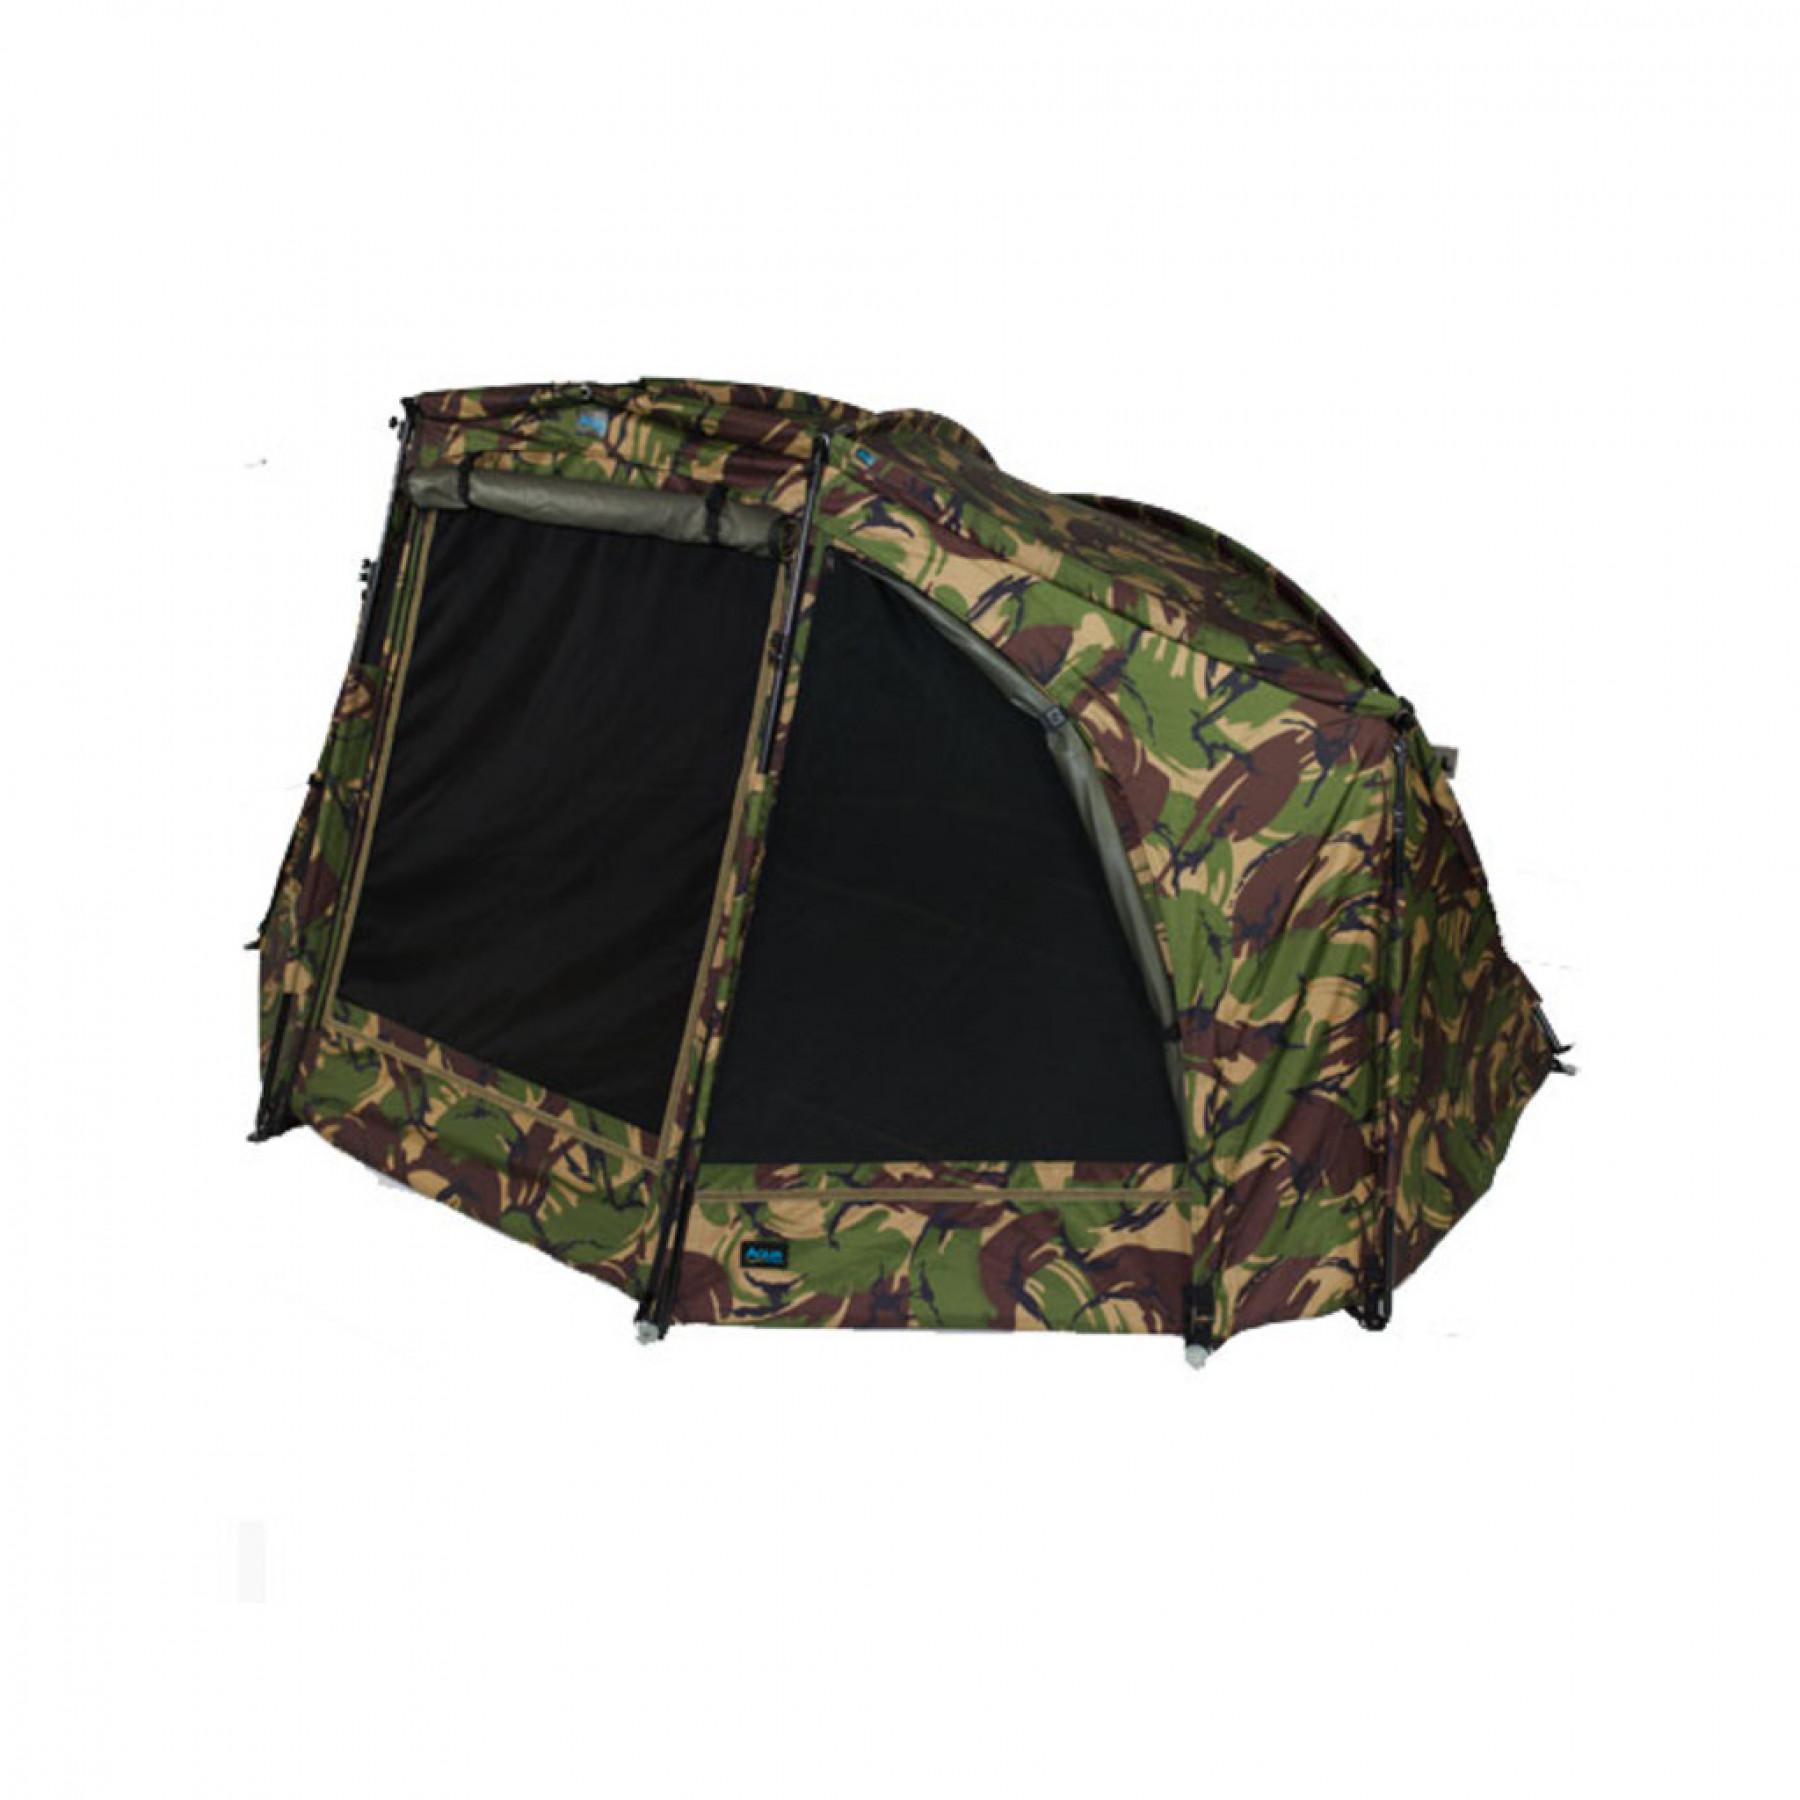 Tent cover Aqua Products DPM Pioneer 100 Wrap System